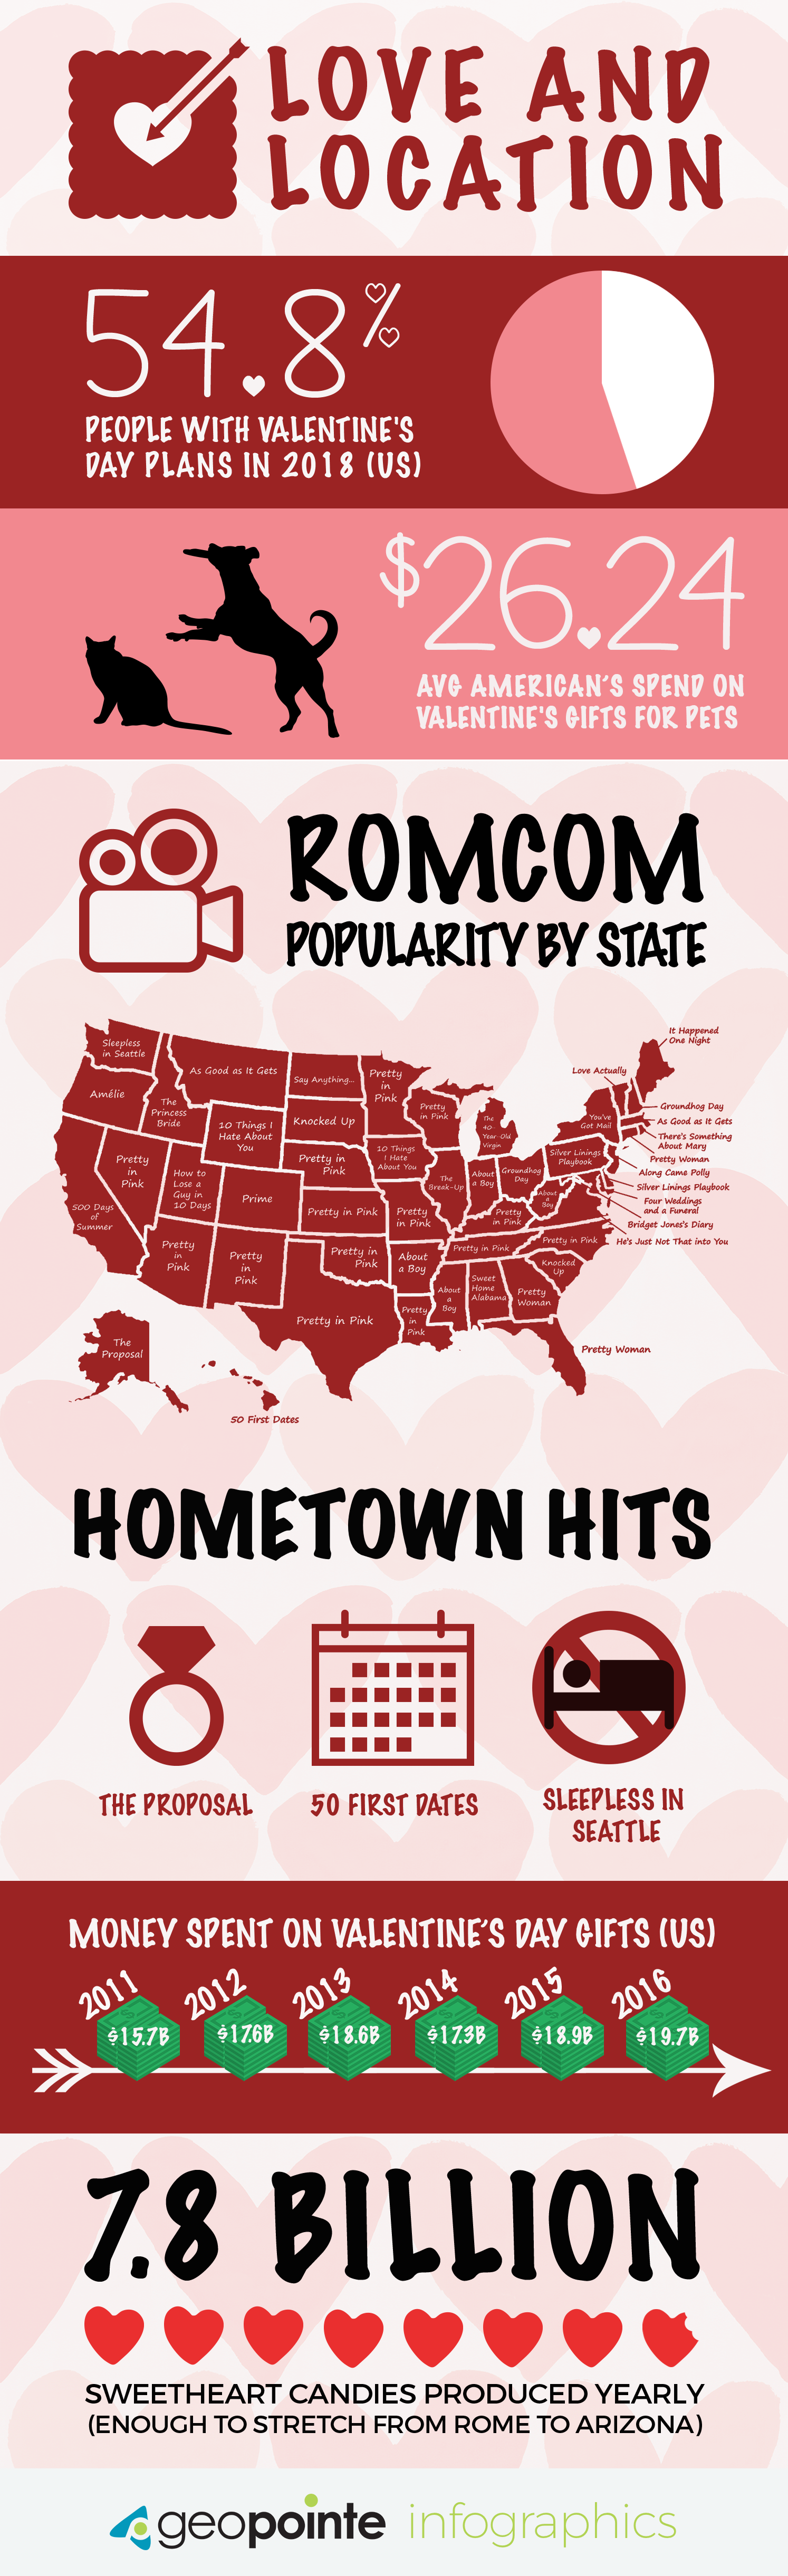 Love & Location: Fun Location-based Facts About Valentine's Day